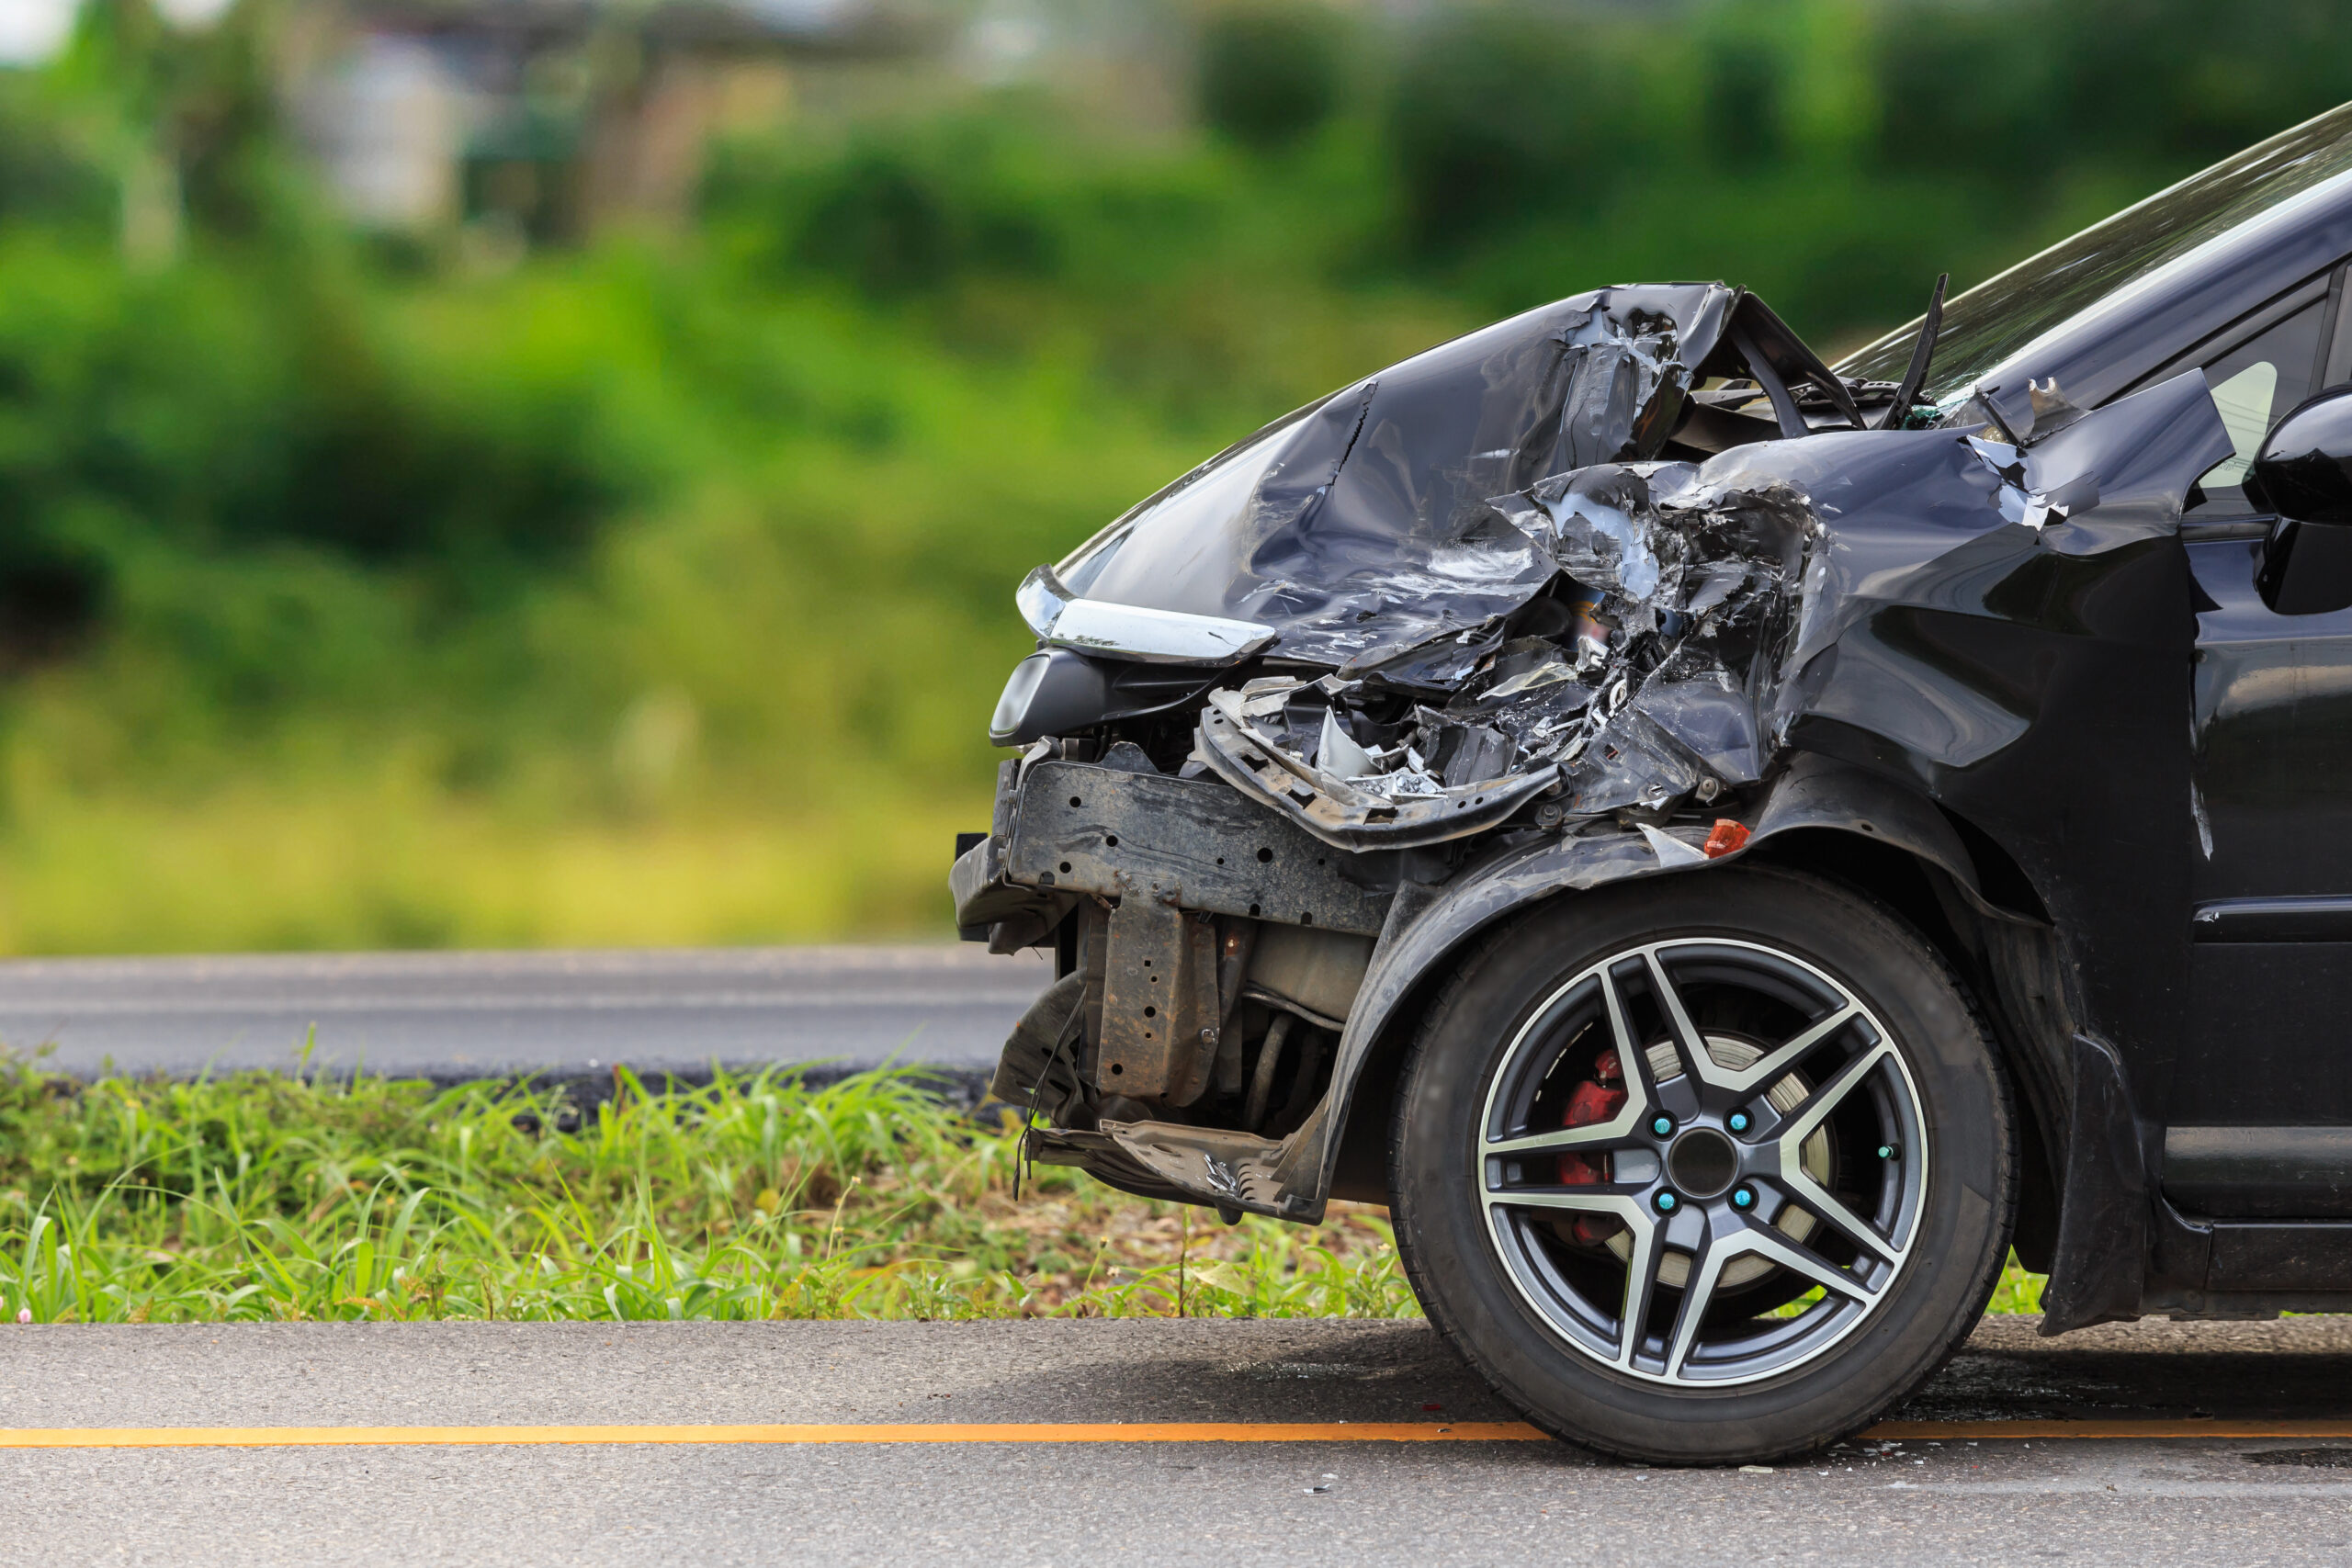 How does Insurance Work in a Drunk Driving Accident Case?